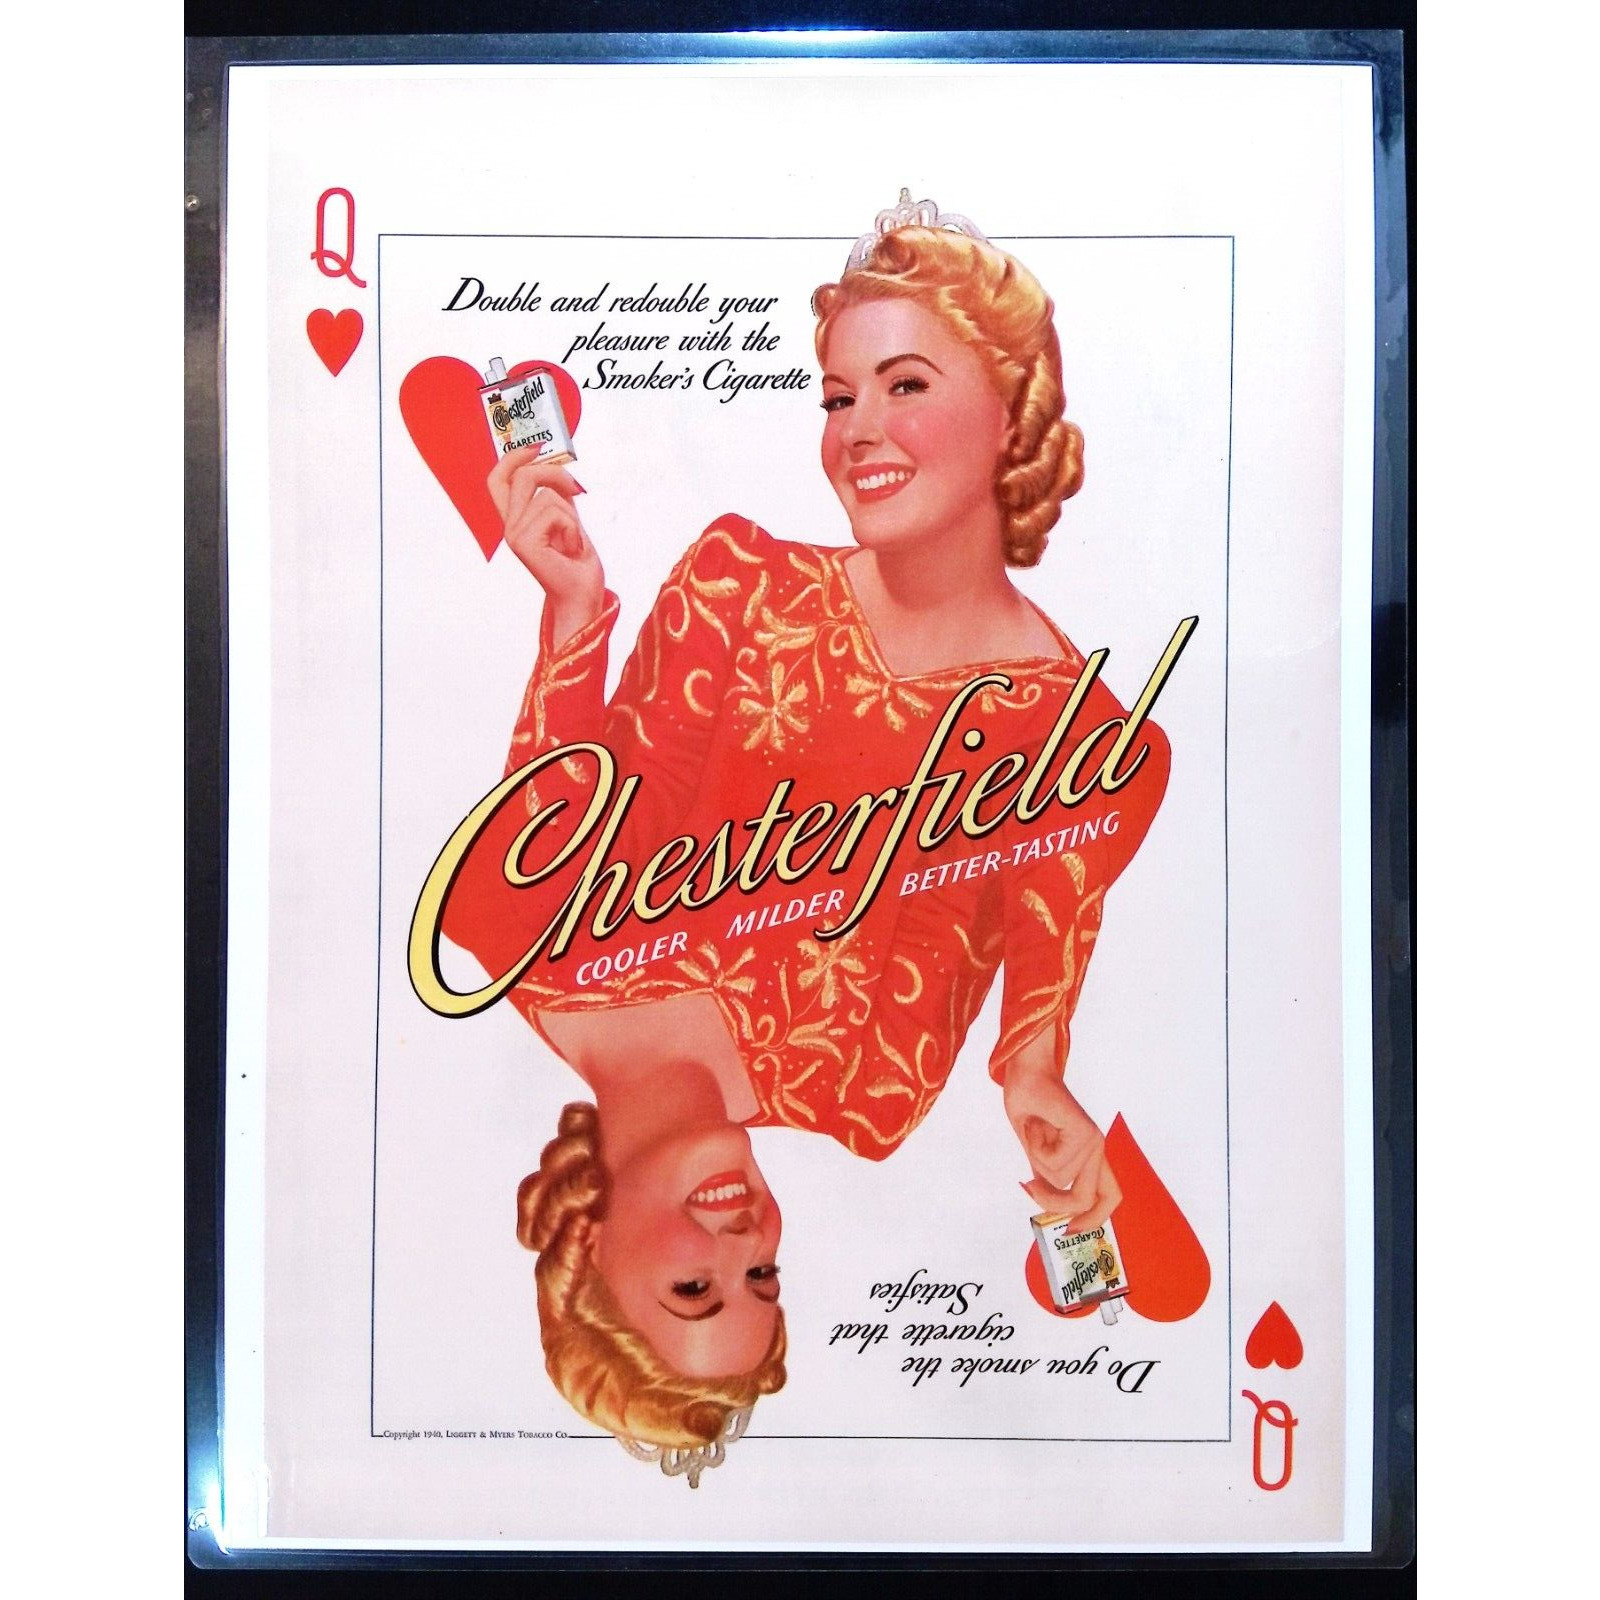 Chesterfield Cigarettes 1940s Print Ad Poster Laminated Queen of Hearts 11\